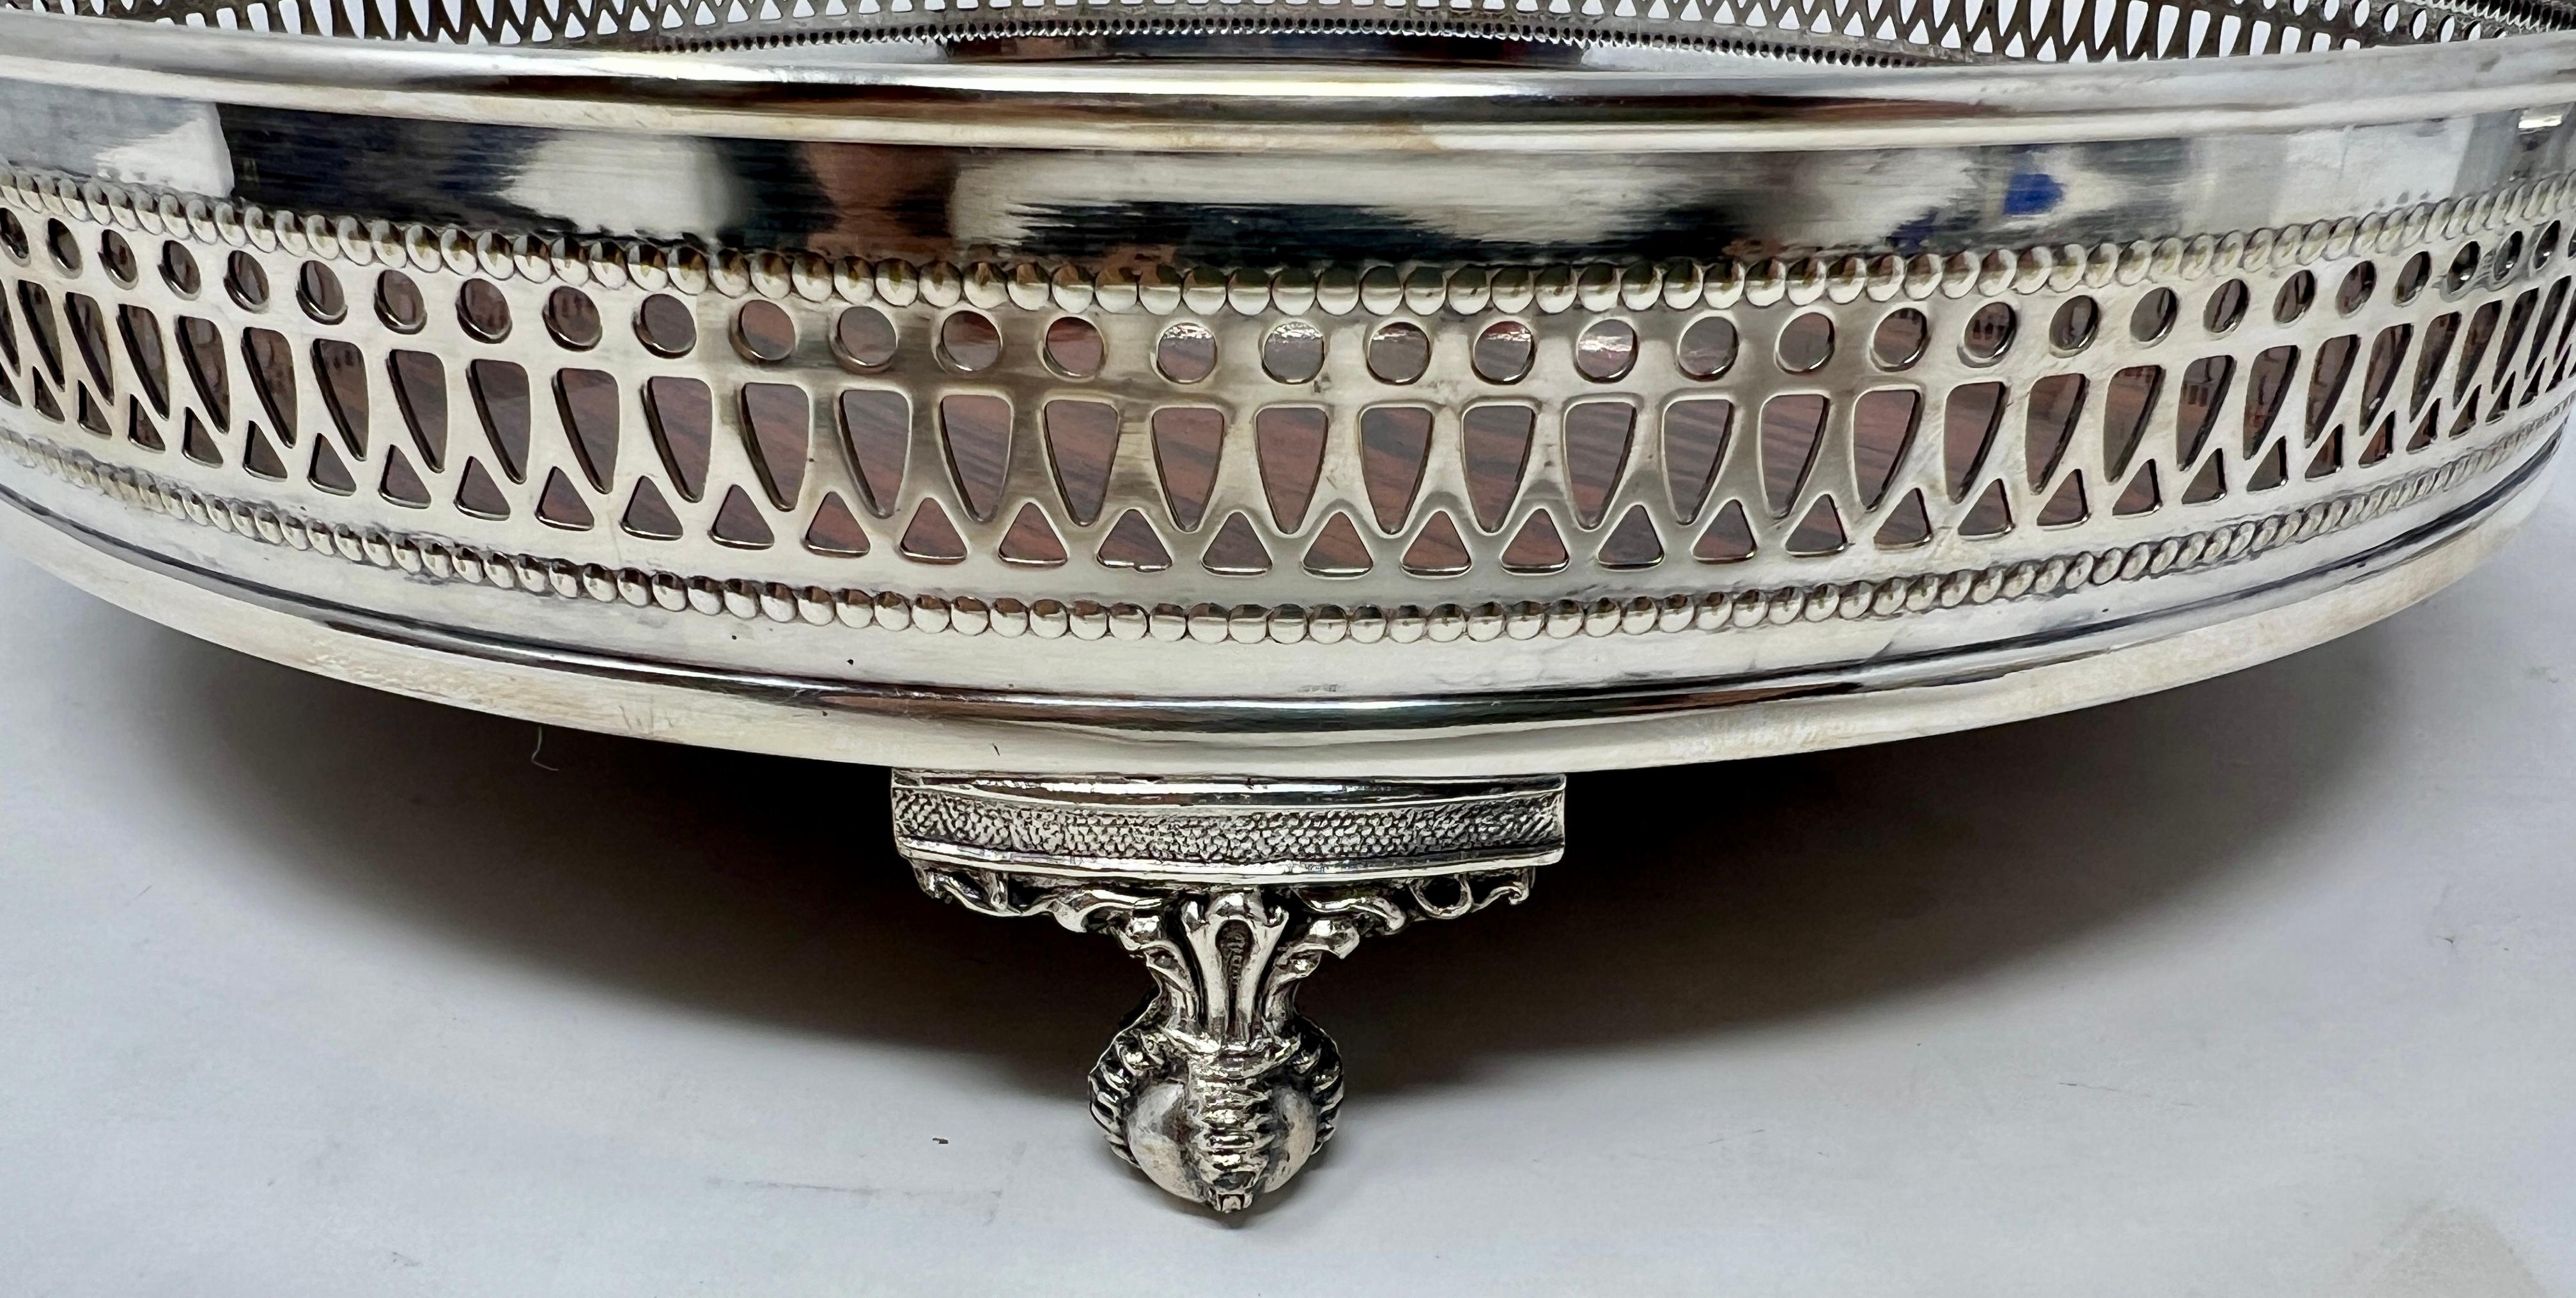 Silver Plate Estate English Silver-Plate Footed Galleried Tray, Circa 1950s-1960s. For Sale